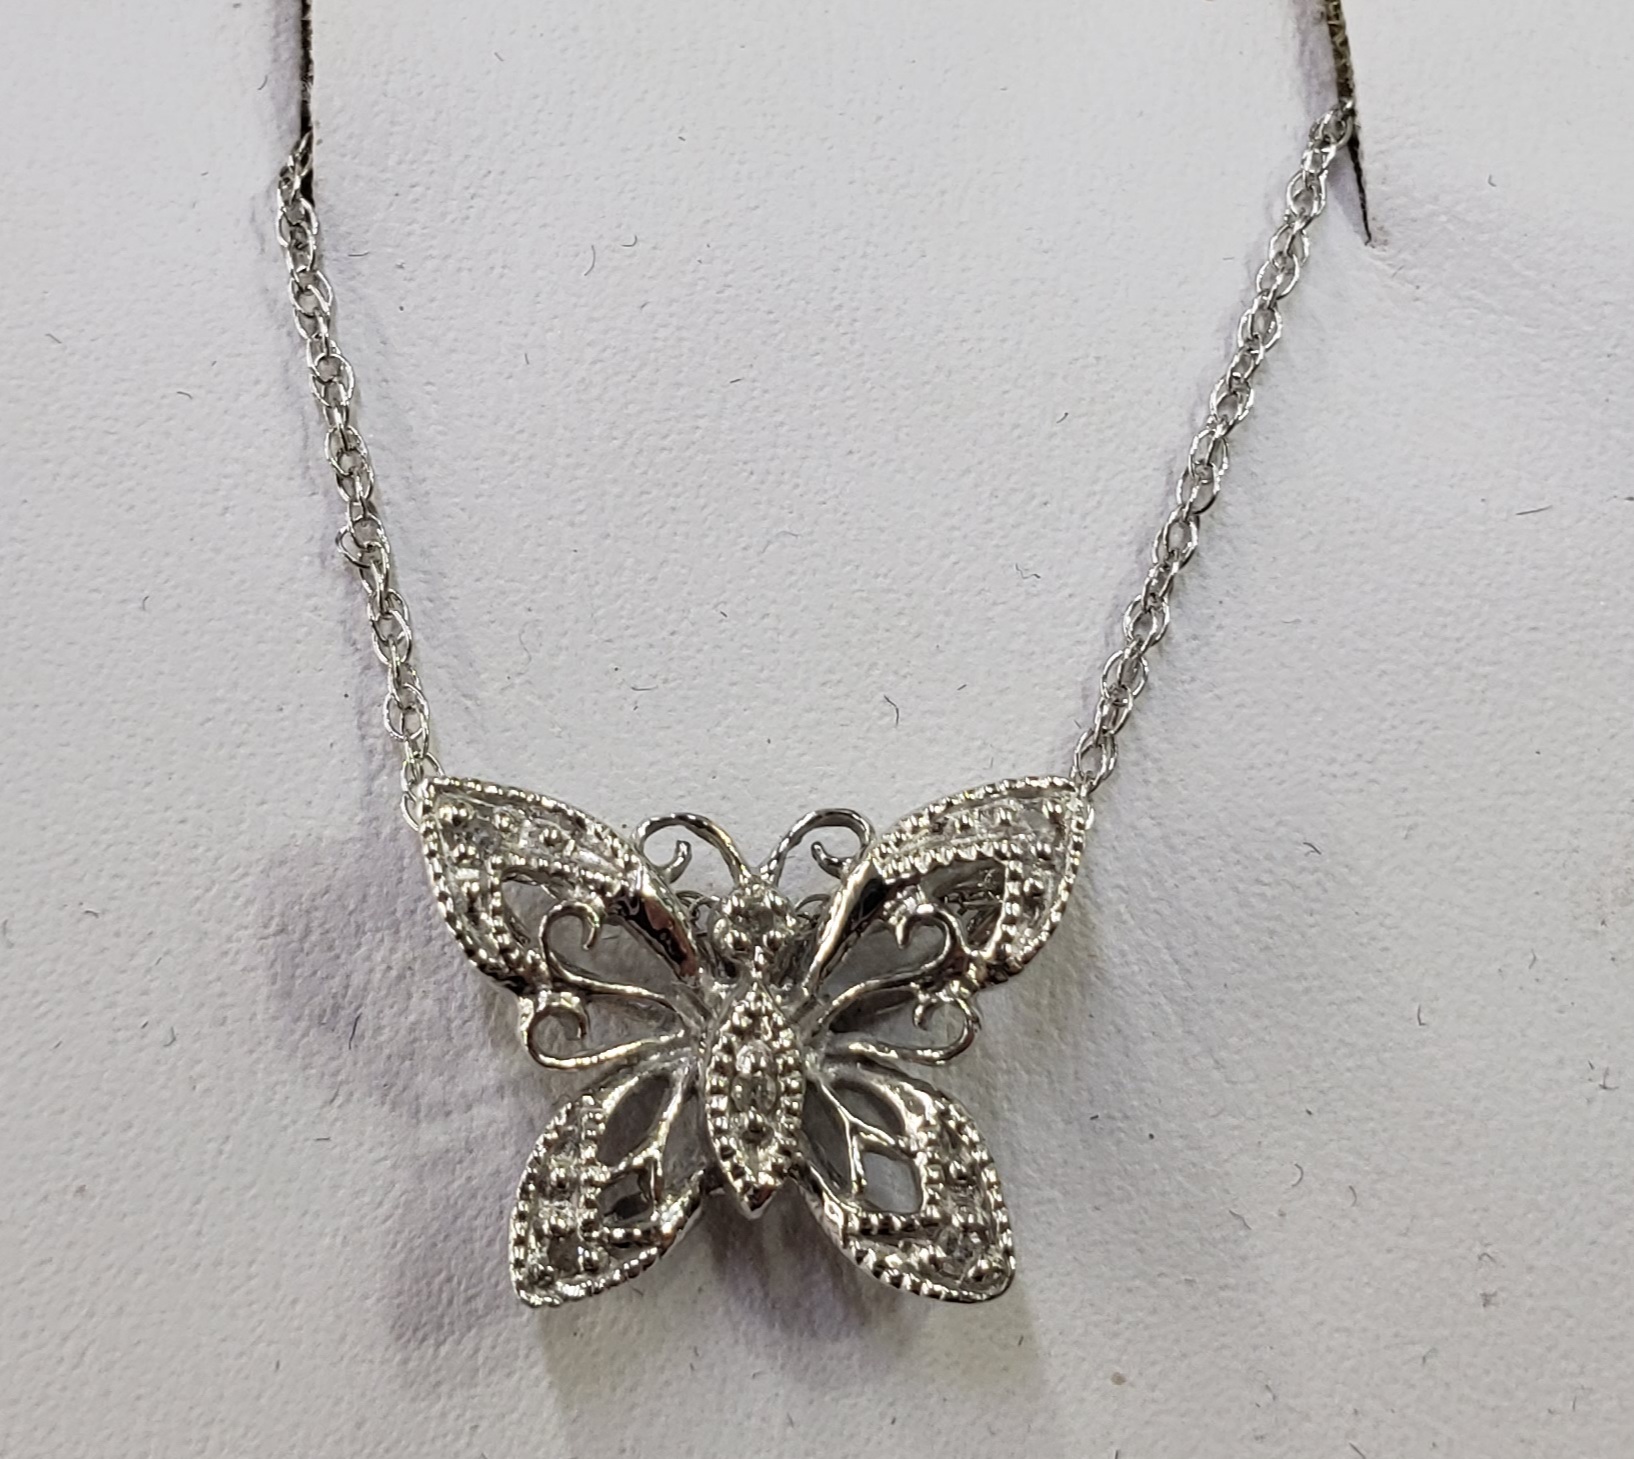 10k White Gold Butterfly Necklace

Pictures do not do the jewelry justice.
Photo ID required for pick up of online purchases. We will not ship jewelry purchases.

All jewelry has been checked by a Certified Gemological Institute of America (GIA) Accredited Jewelry Professional (AJP) and/or appraised by a certified local jeweler.